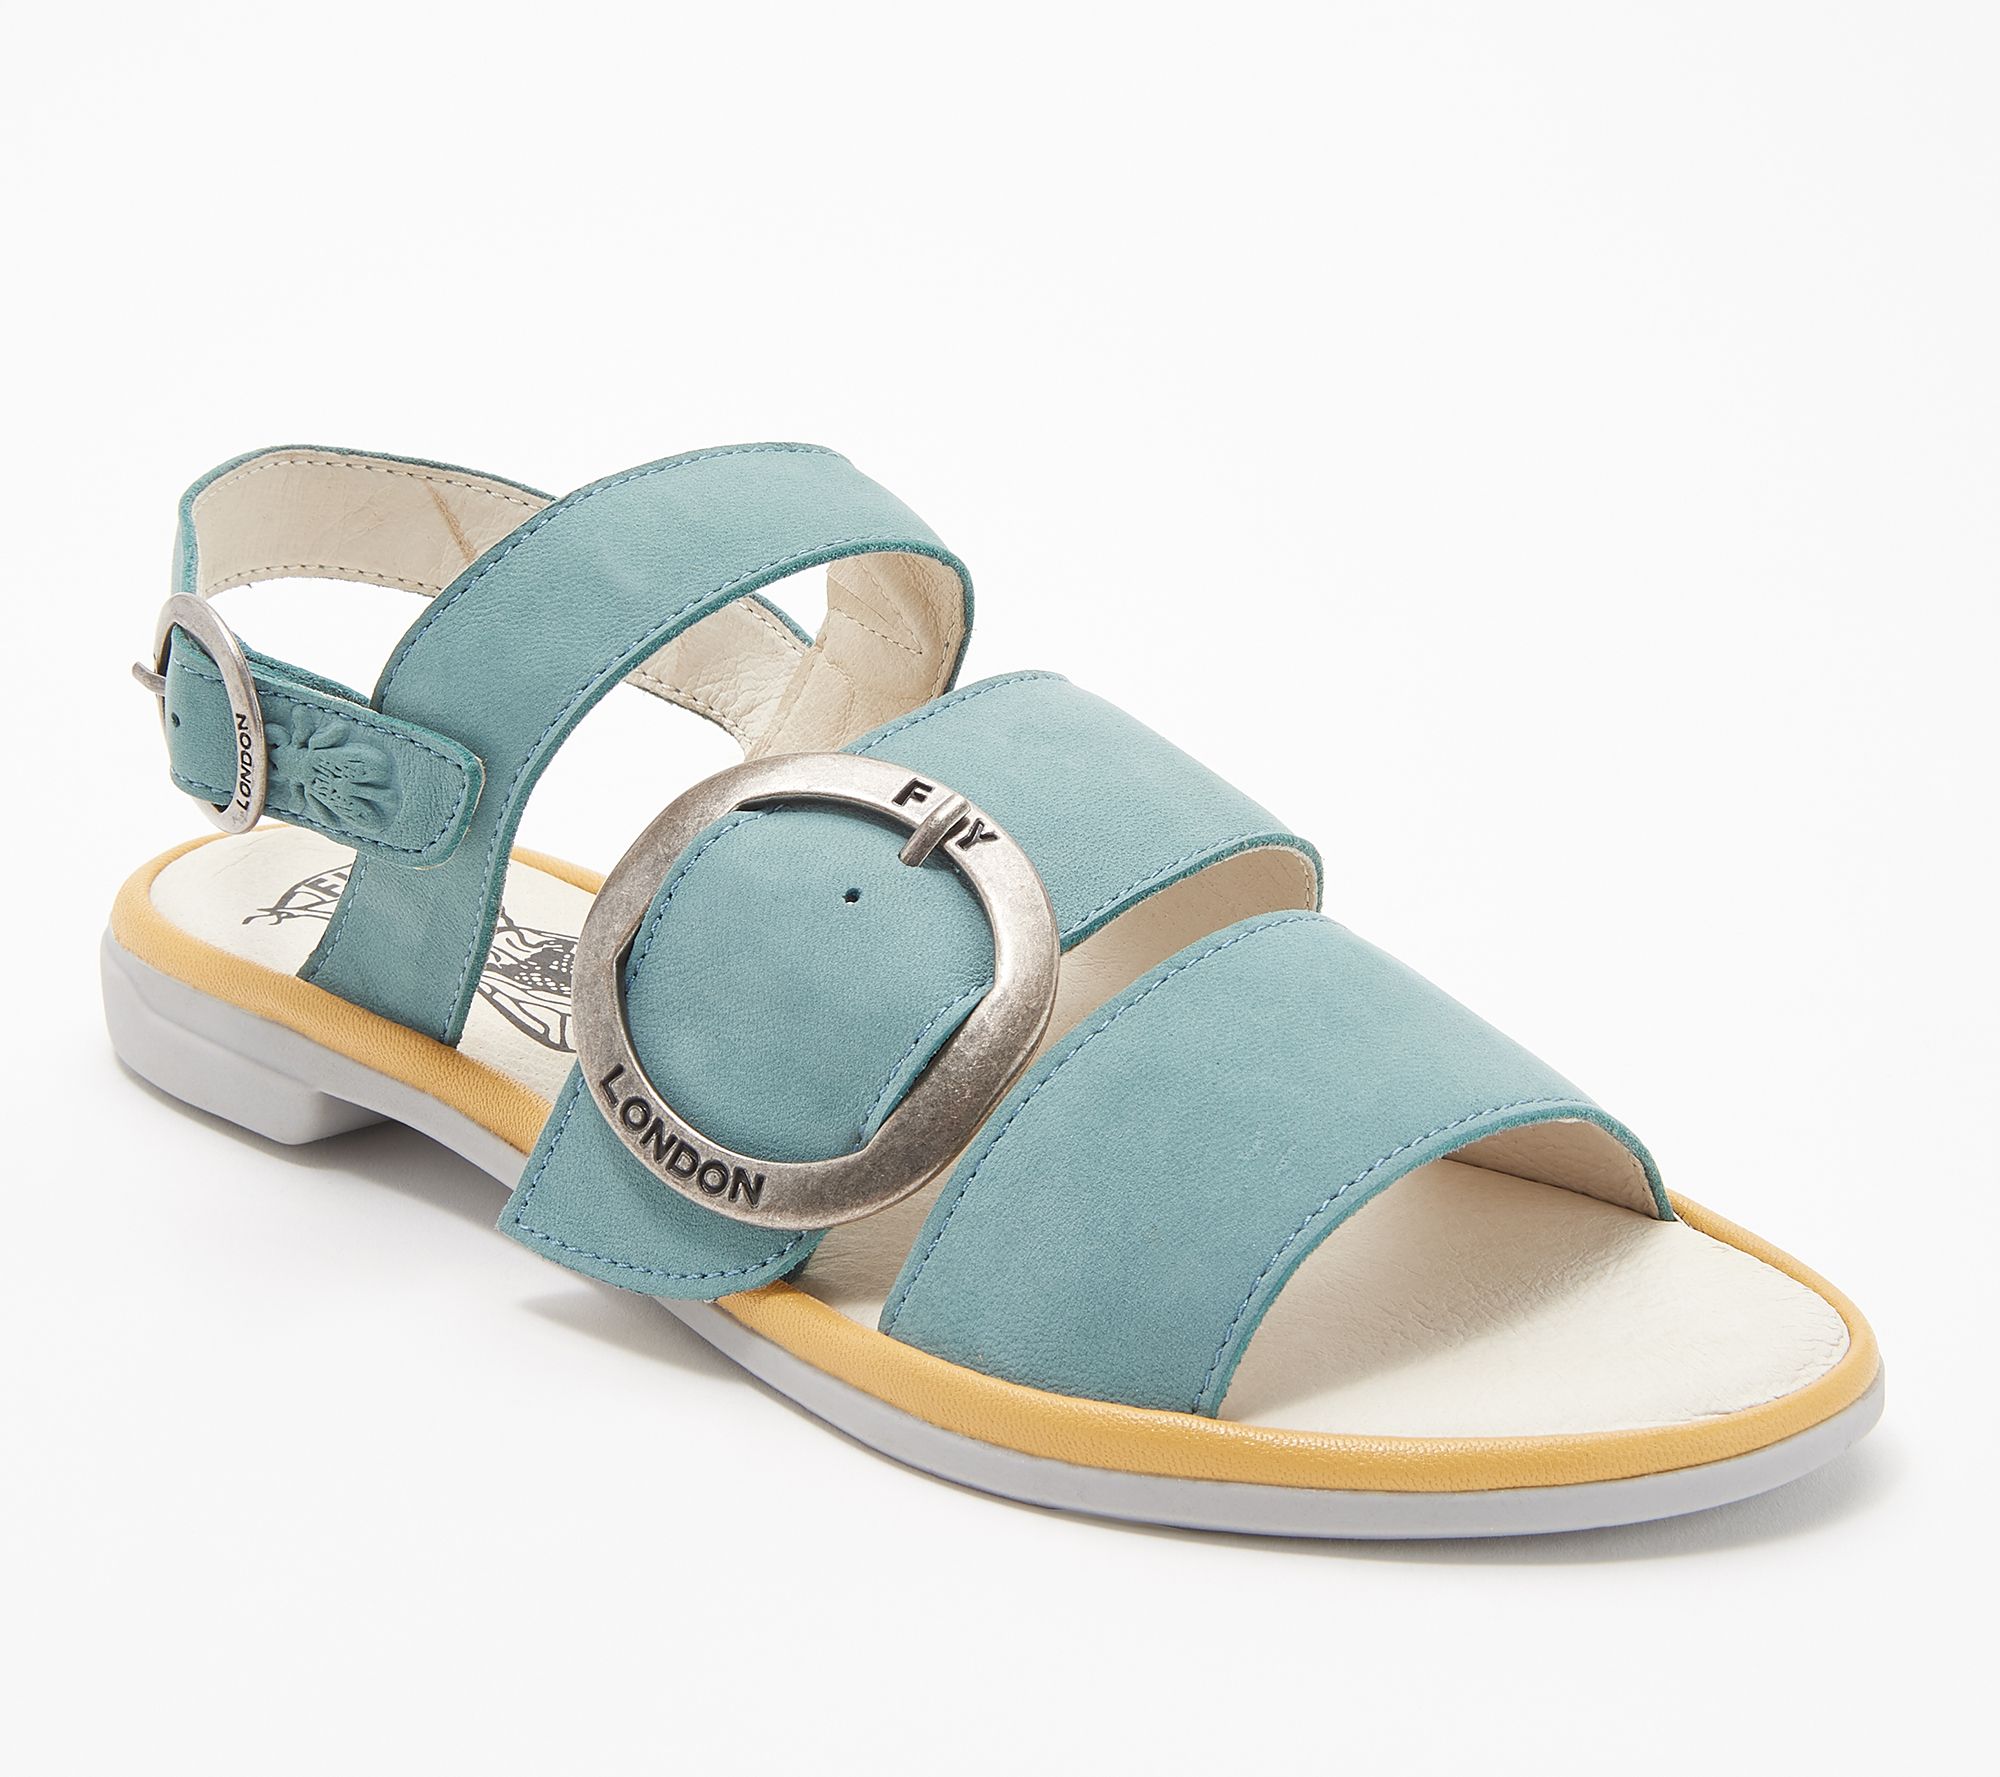 FLY London Leather Sandals with Buckle Detail - Codo - QVC.com